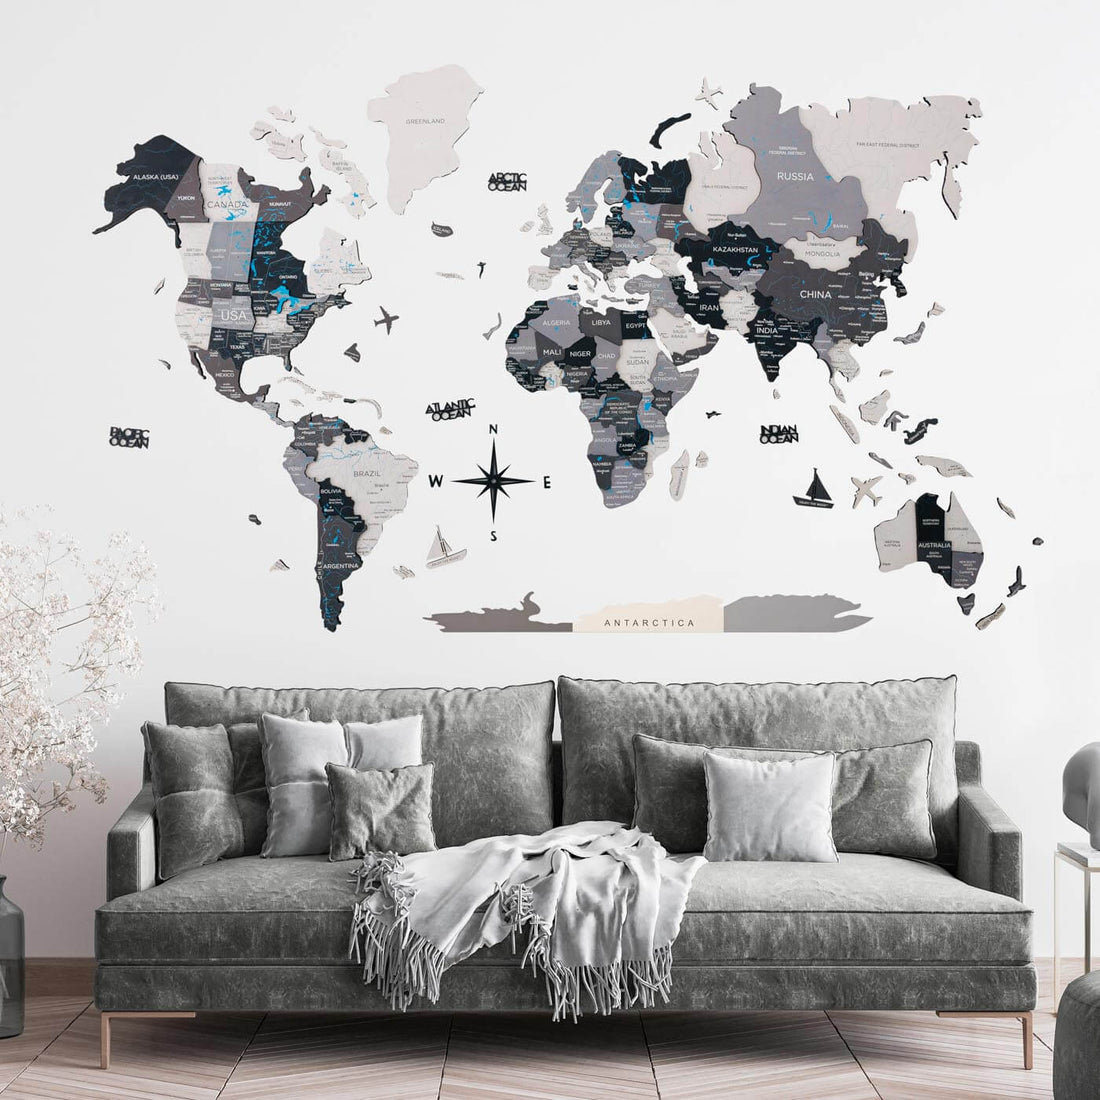 3D Wooden World Map in Nordik in a Living Room